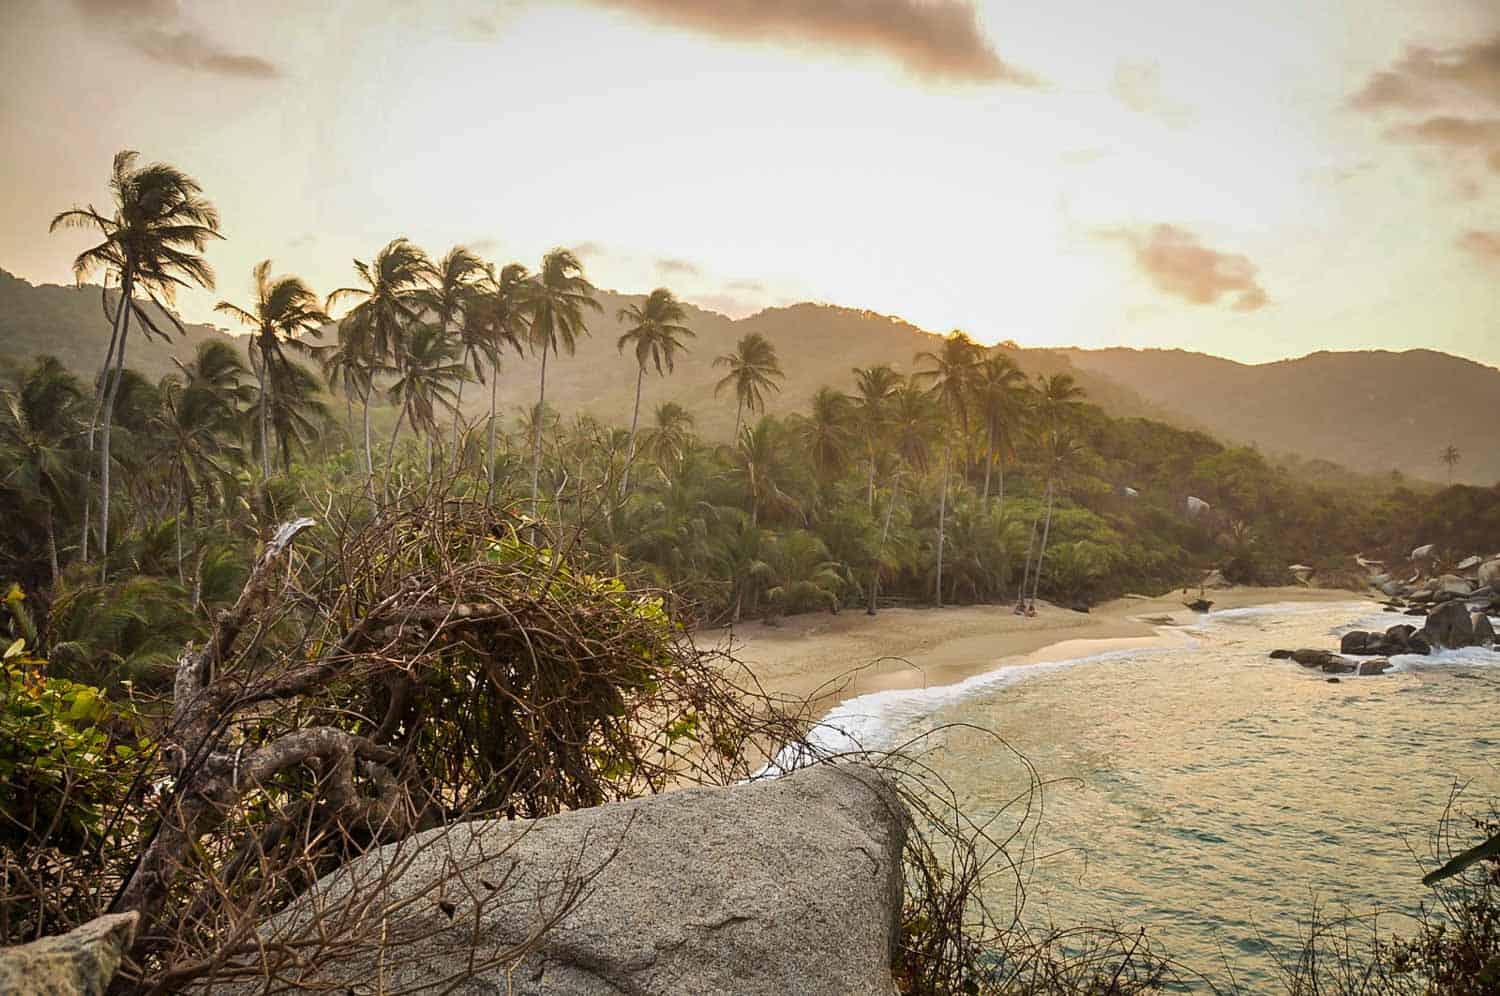 Sunset at the beach of Tayrona National Park in Colombia